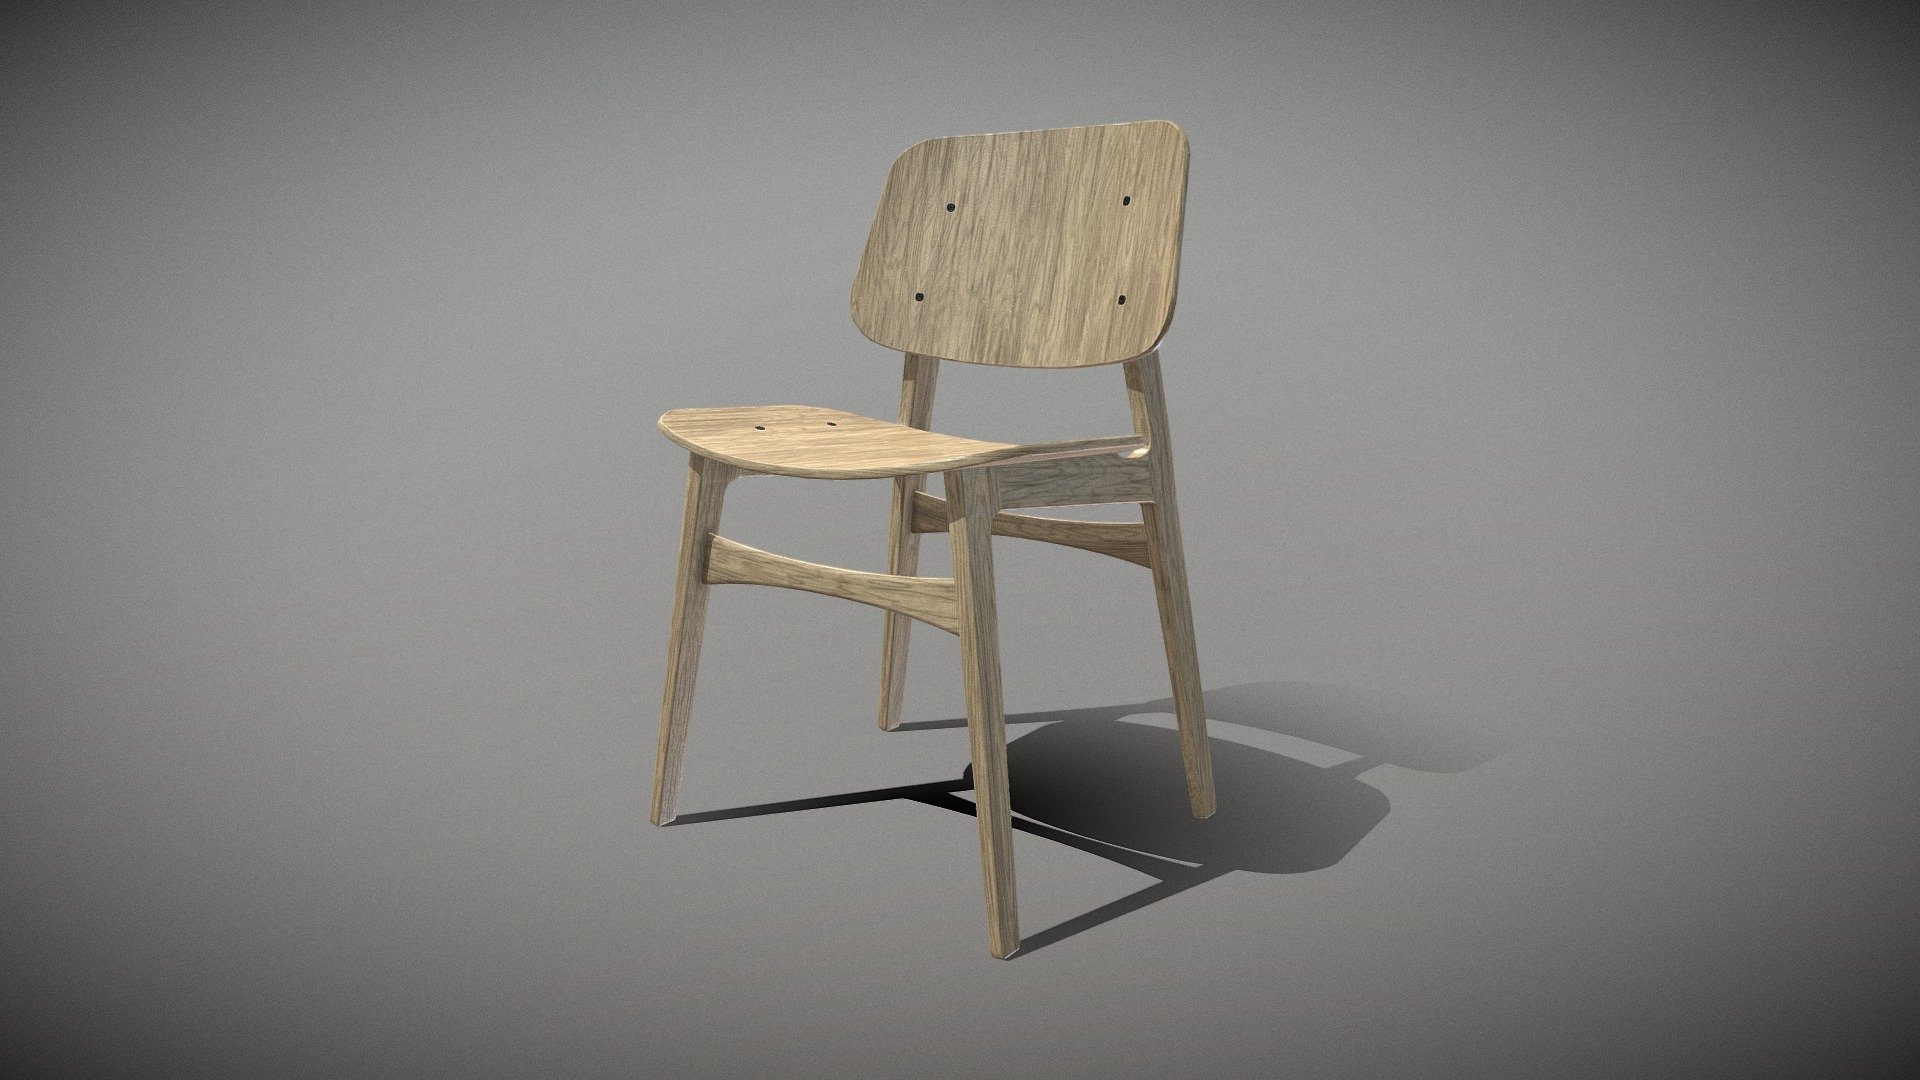 Chair 3d model ready for VirtualReality(VR),Augmented Reality(AR),games and other render engines.This lowpoly 3d model of Chair is equipped with 4k resolution textures.The PBR_Maps includes- albedo,roughness,metallic and normal 3d model